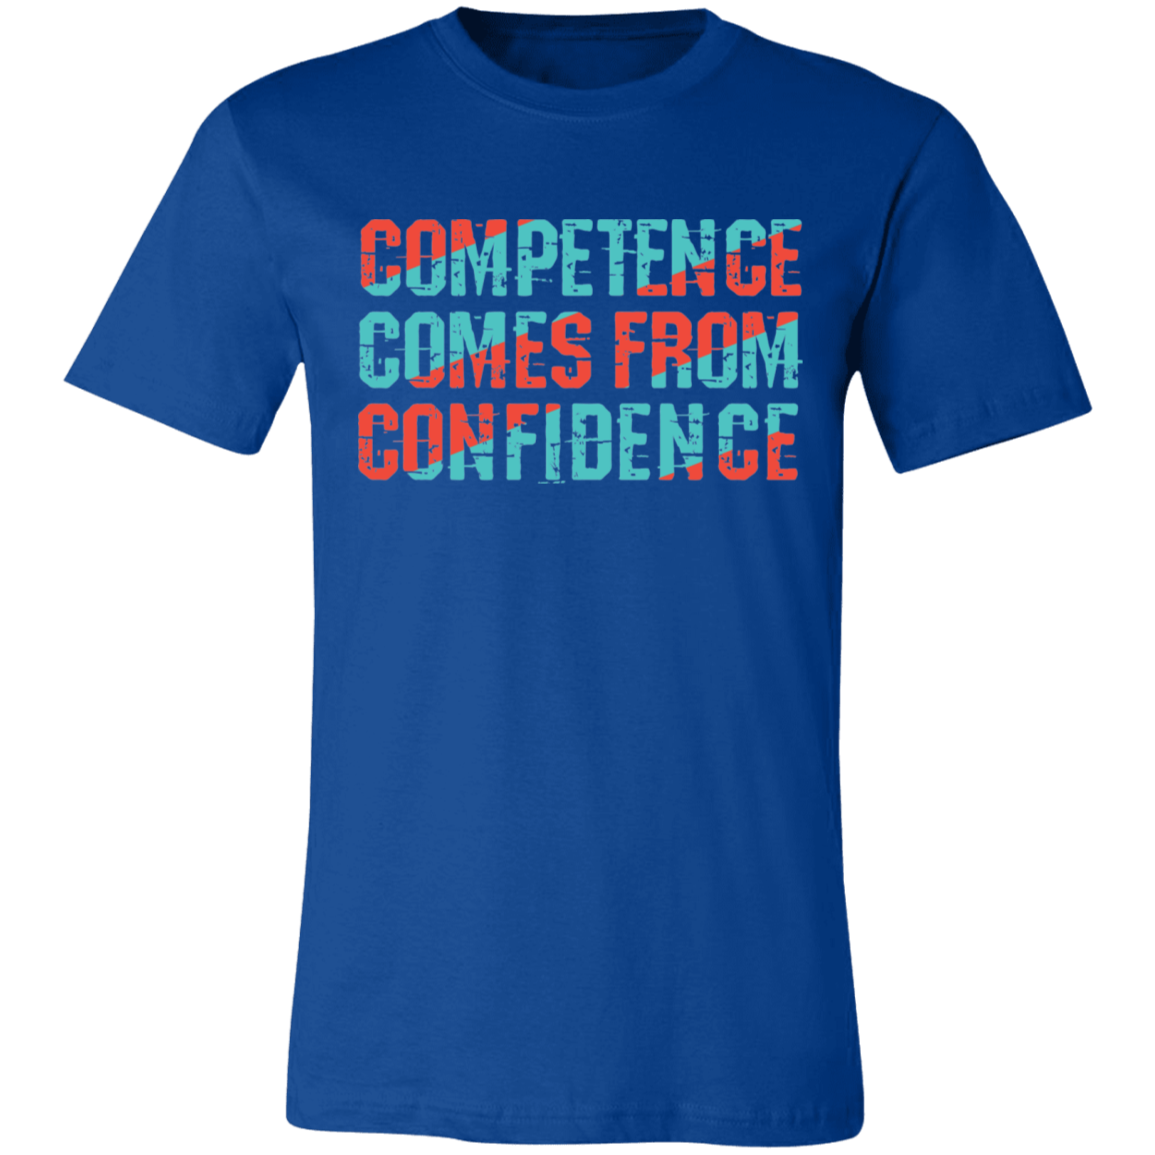 Competence comes from Confidence T-shirt